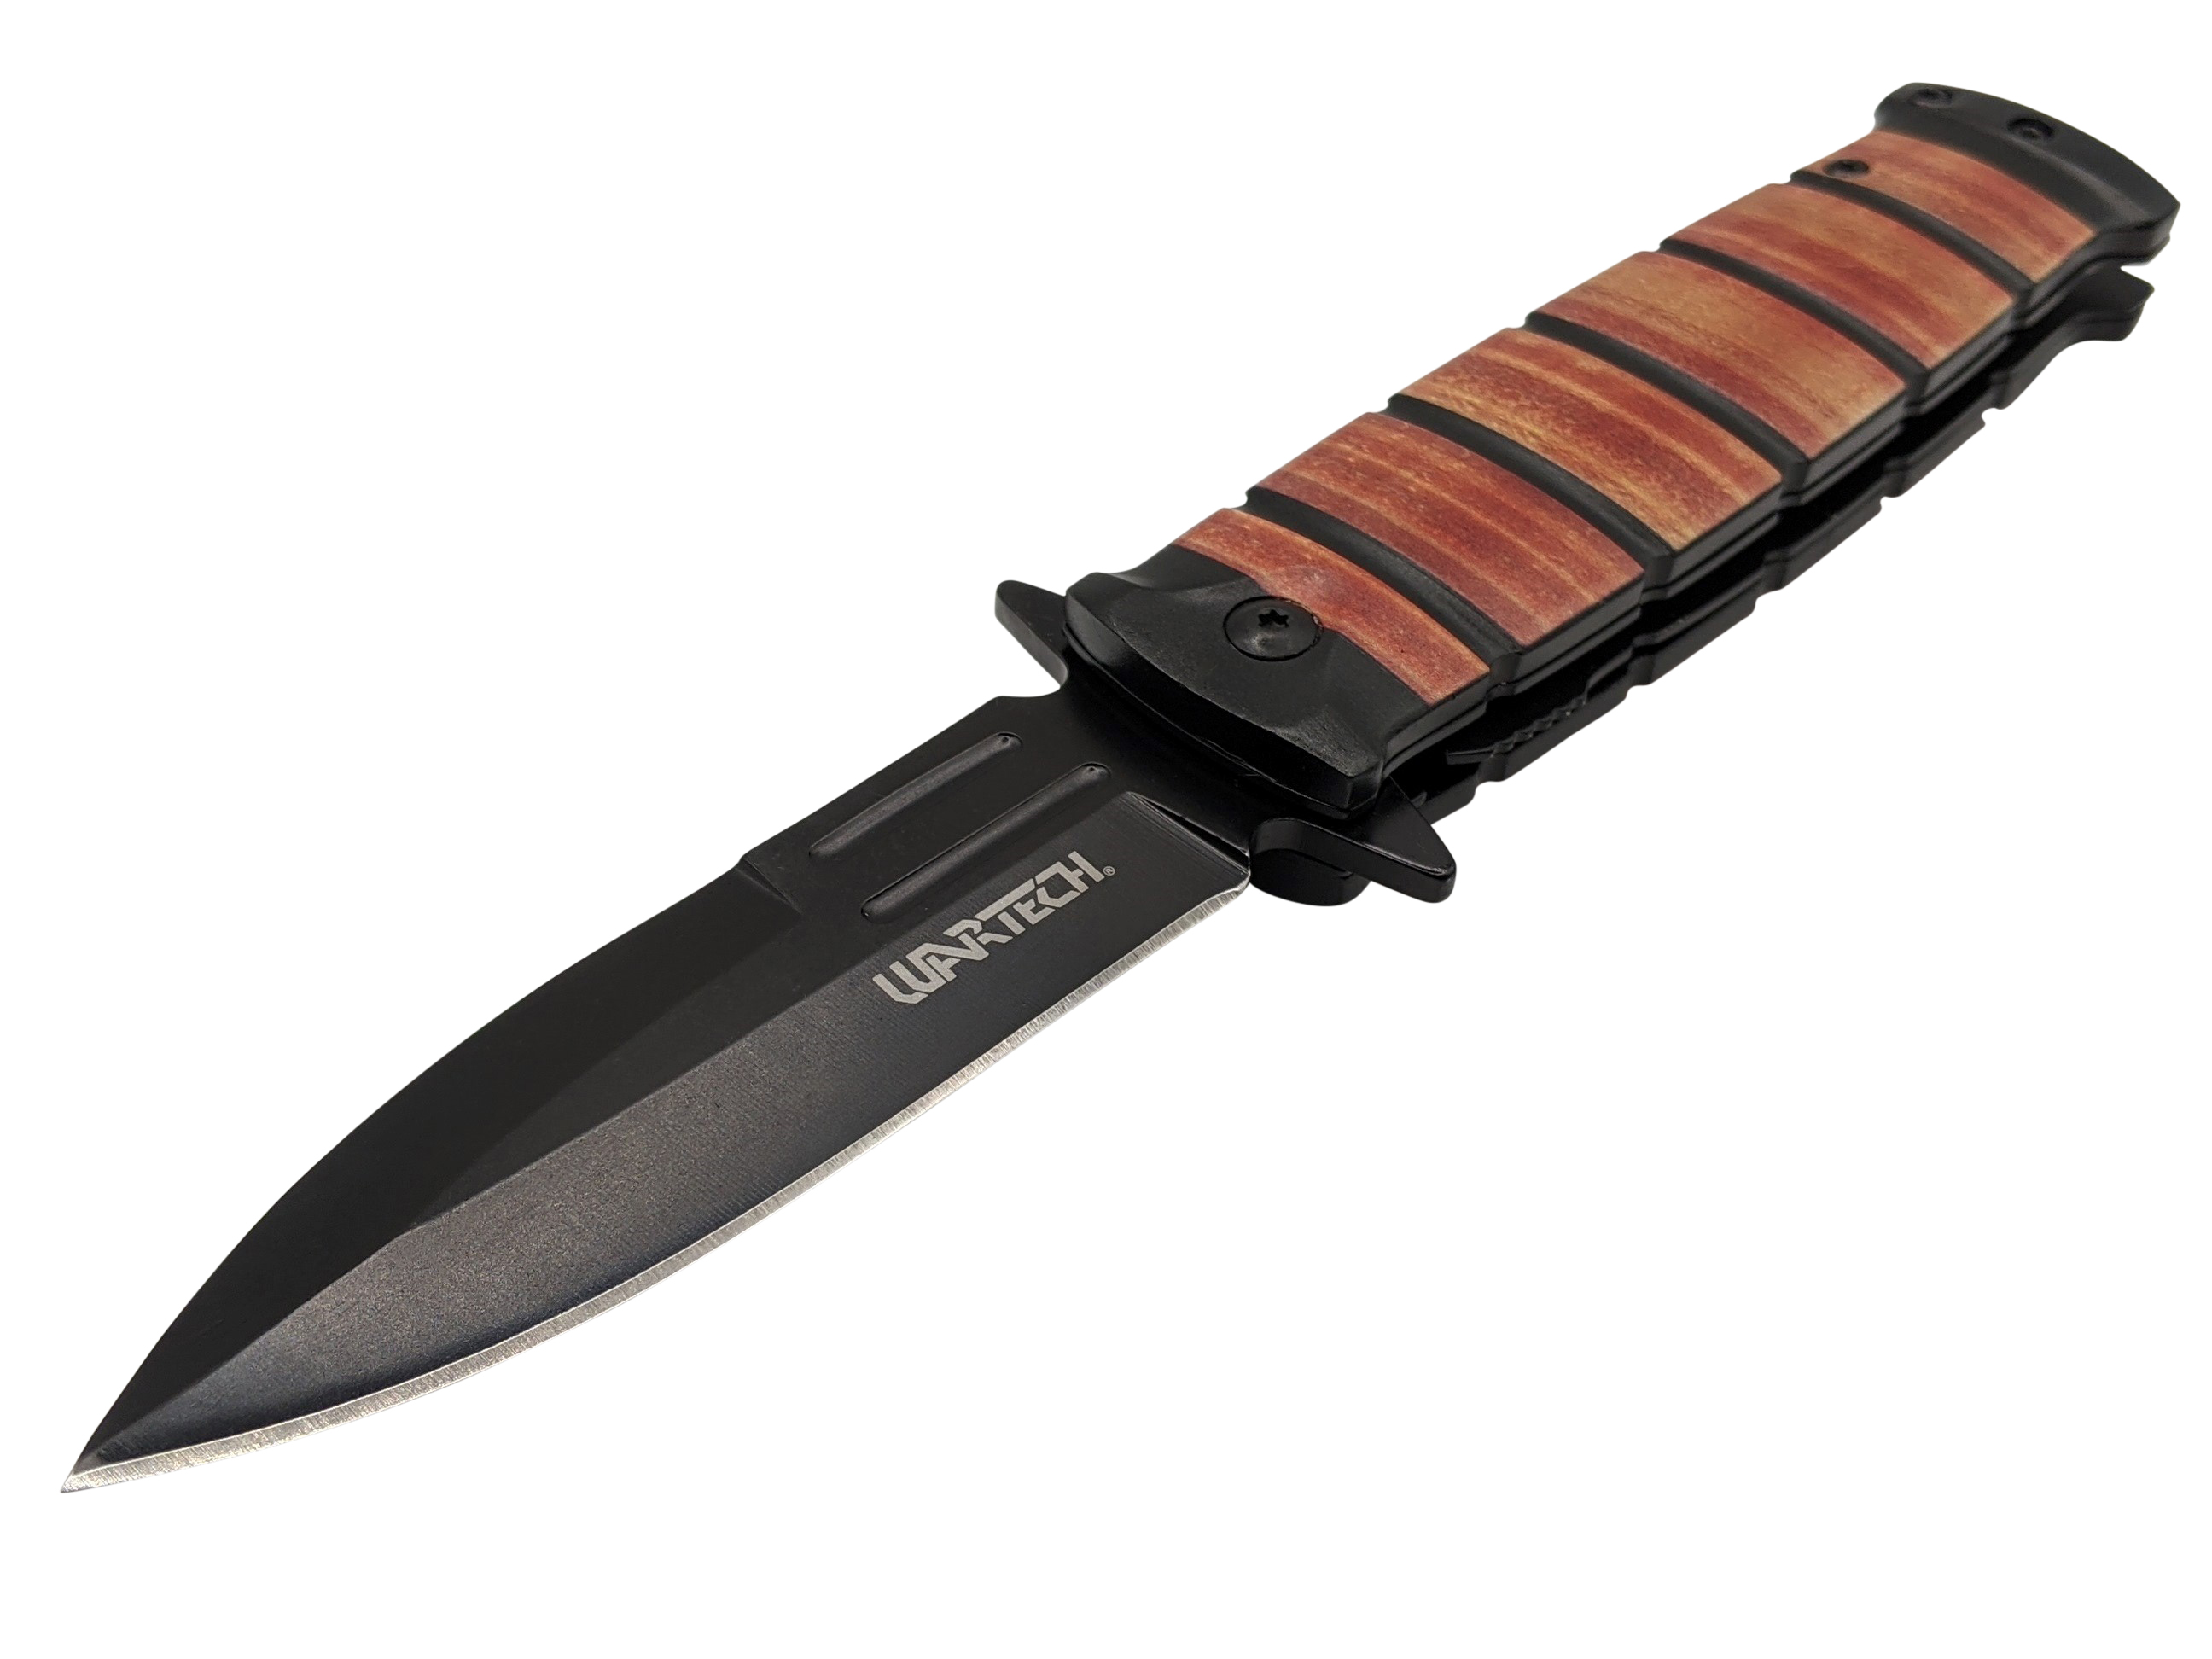 Spring-Assist Folding Knife | Military Combat Tactical 3.5